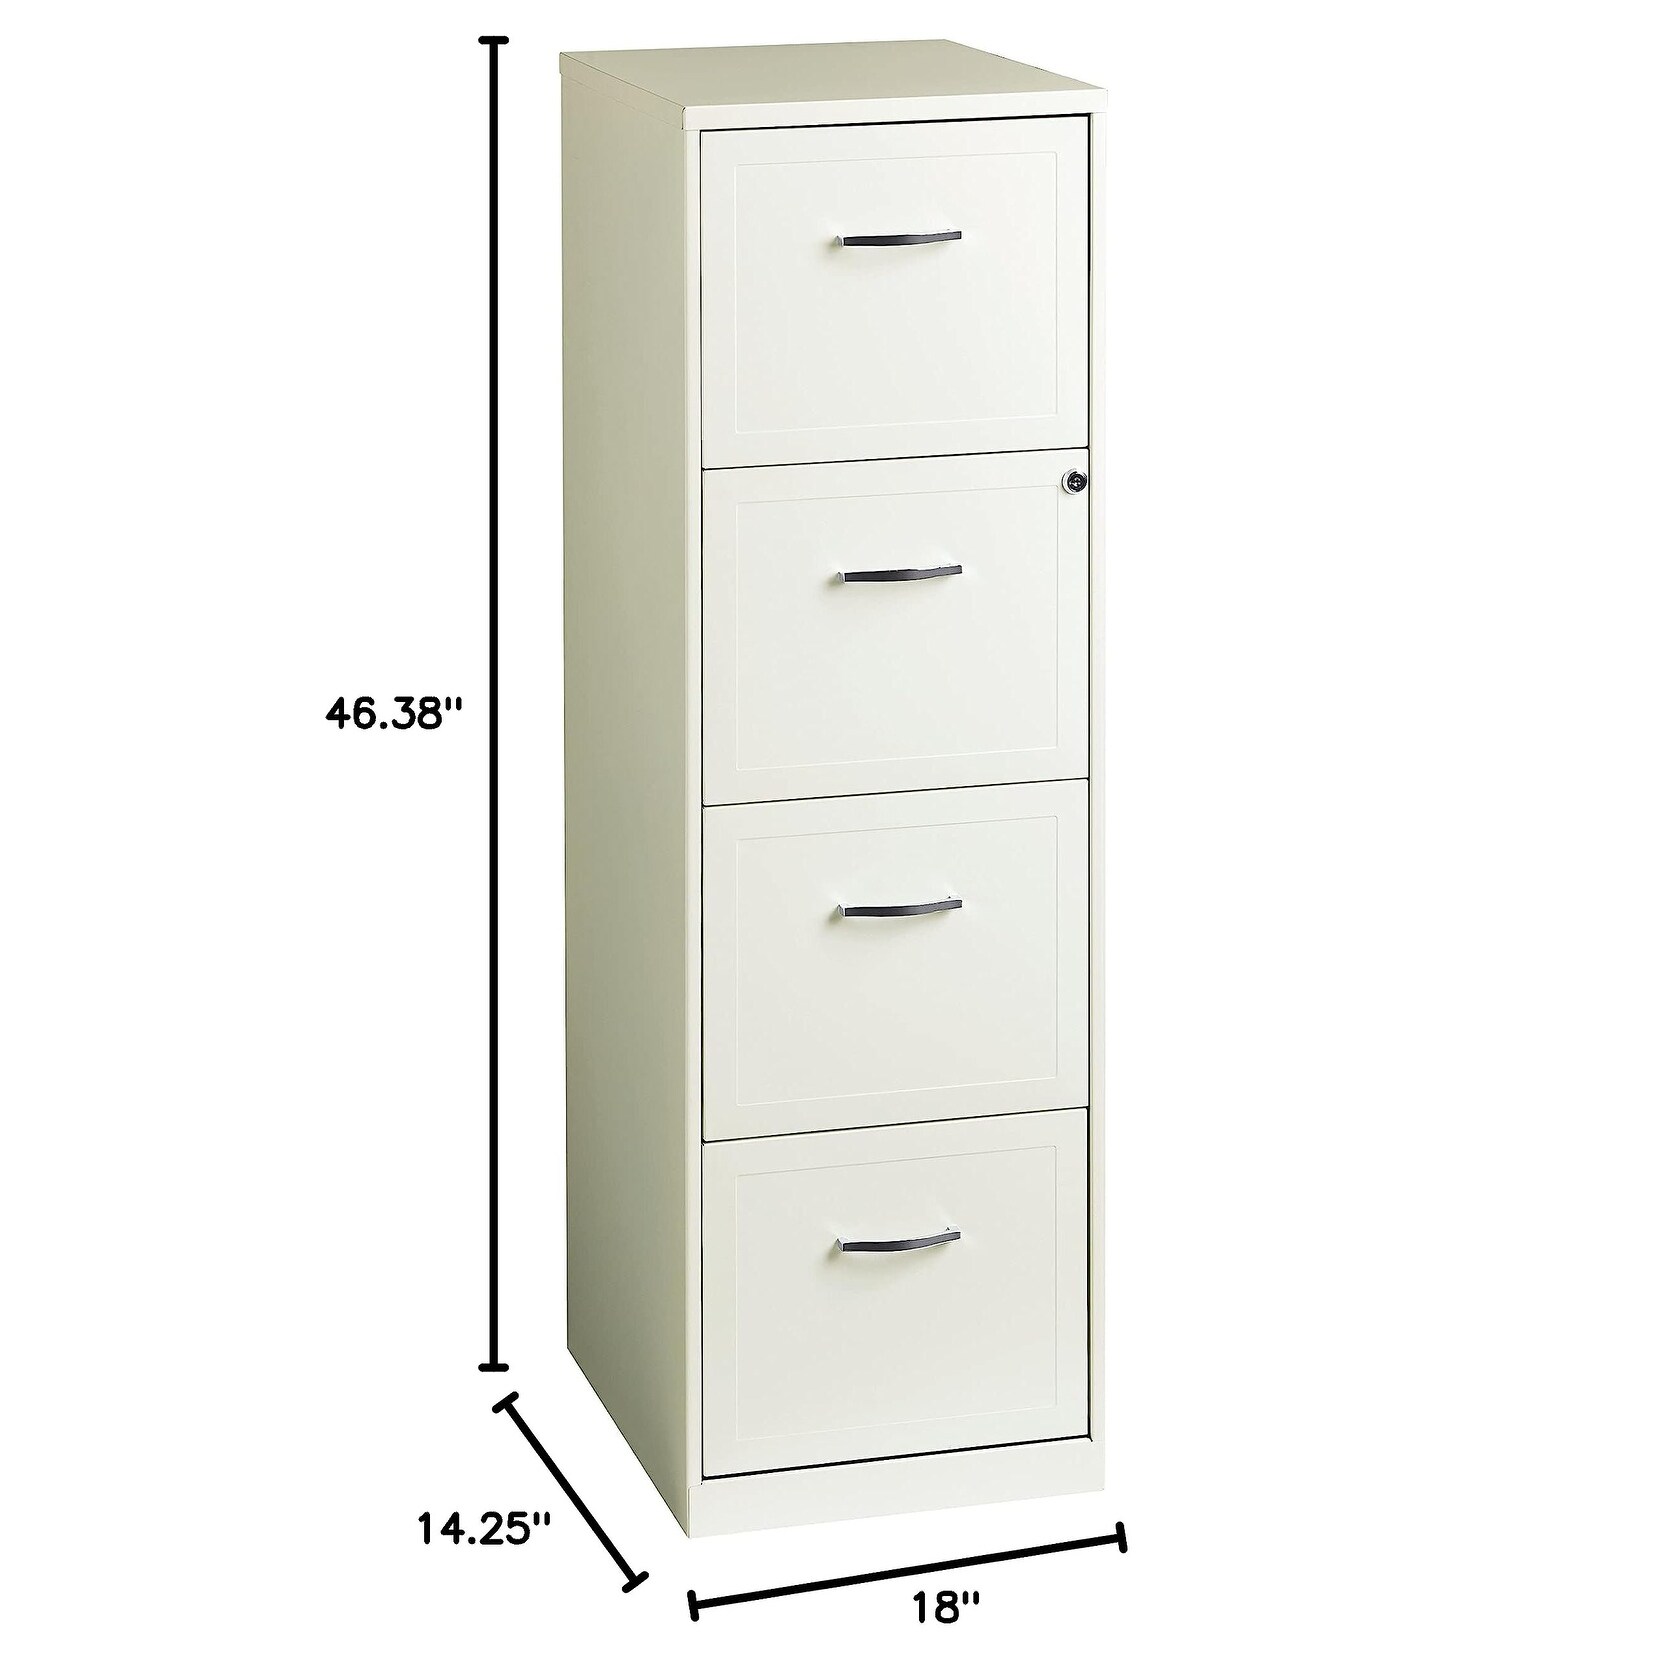 4 Drawer Vertical 18" Metal File Cabinet, Pearl White